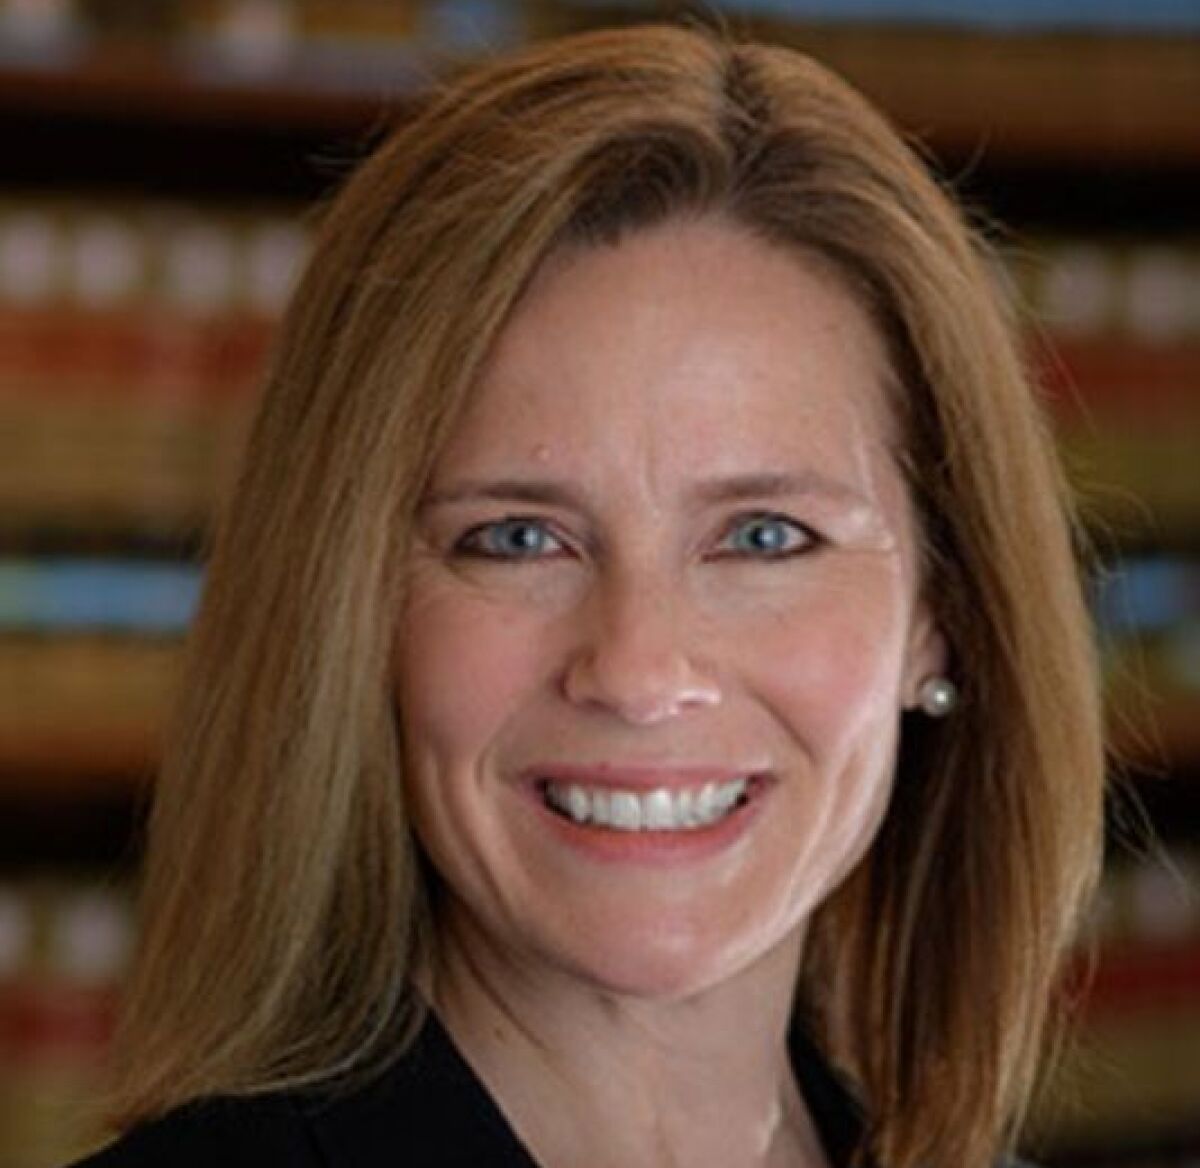 A portrait of federal Judge Amy Coney Barrett of the 7th Circuit Court of Appeals.